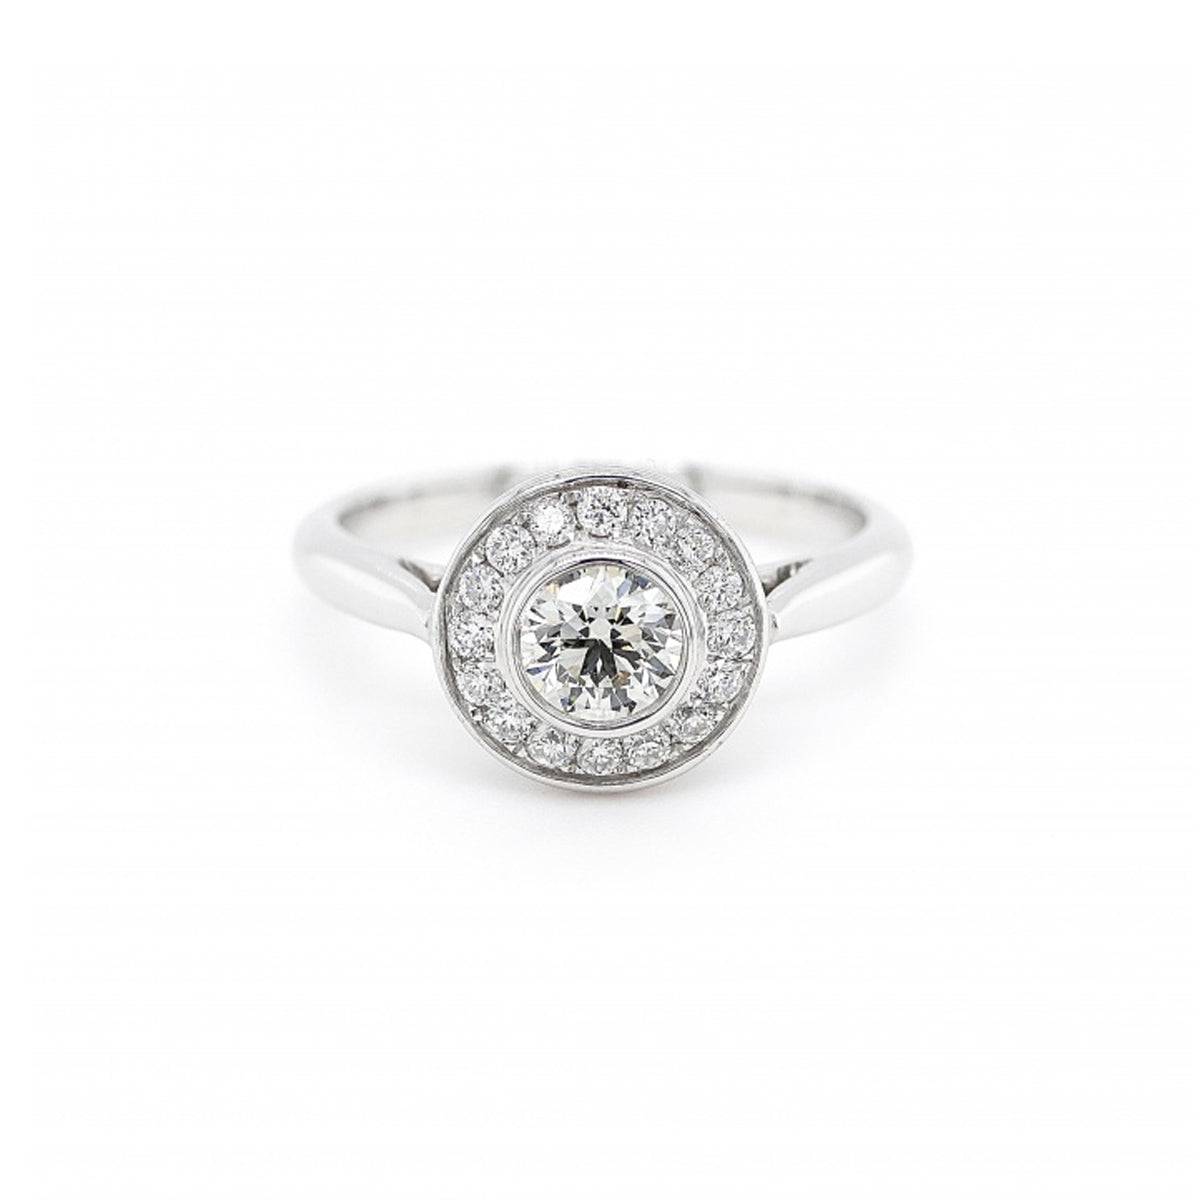 18ct White Gold Rubover Halo Diamond Ring